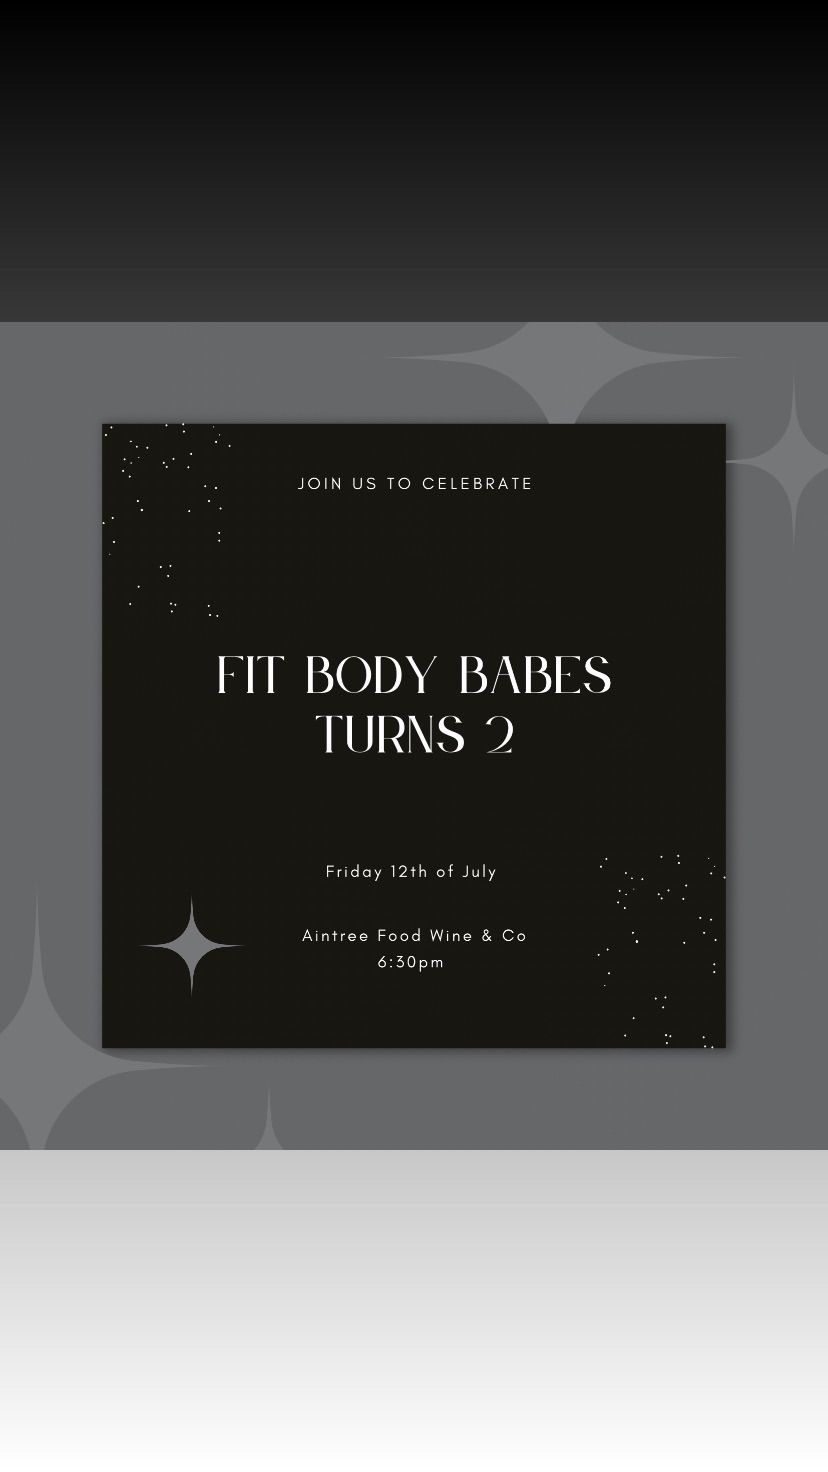 Fit Body Babes Turns Two \ud83e\udd0d